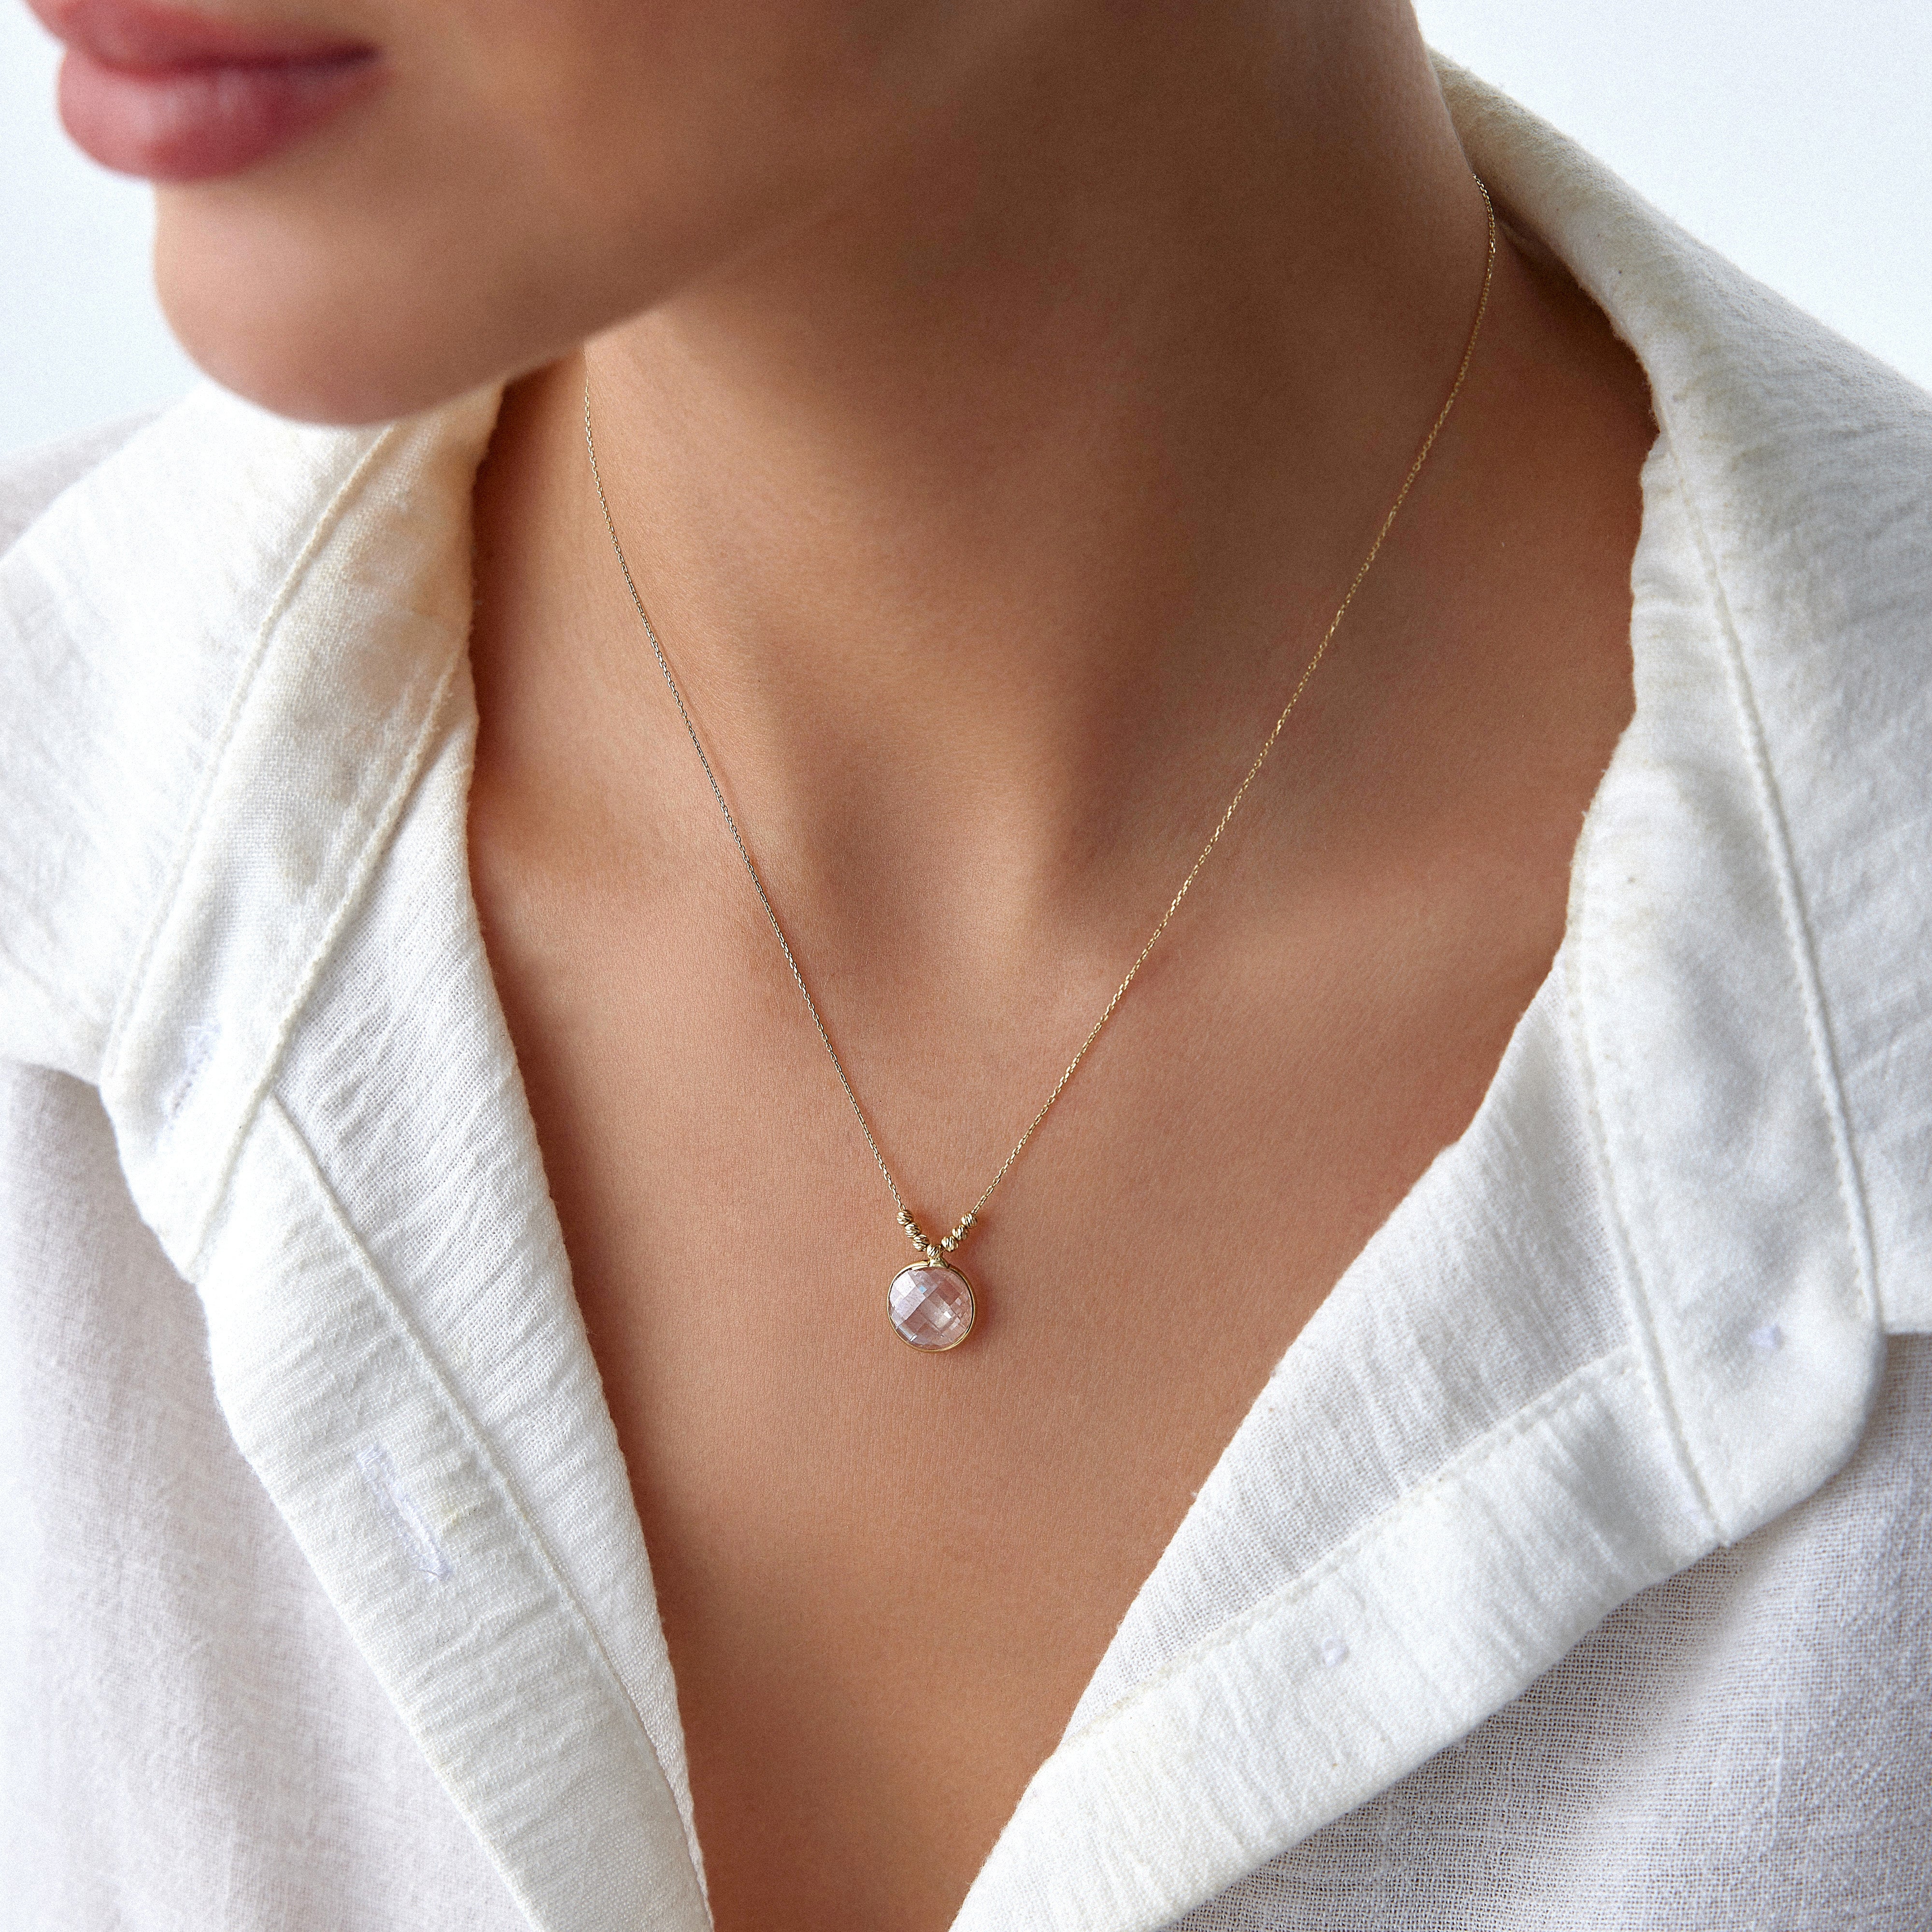 White Crystal Pendant Necklace in 14K Gold